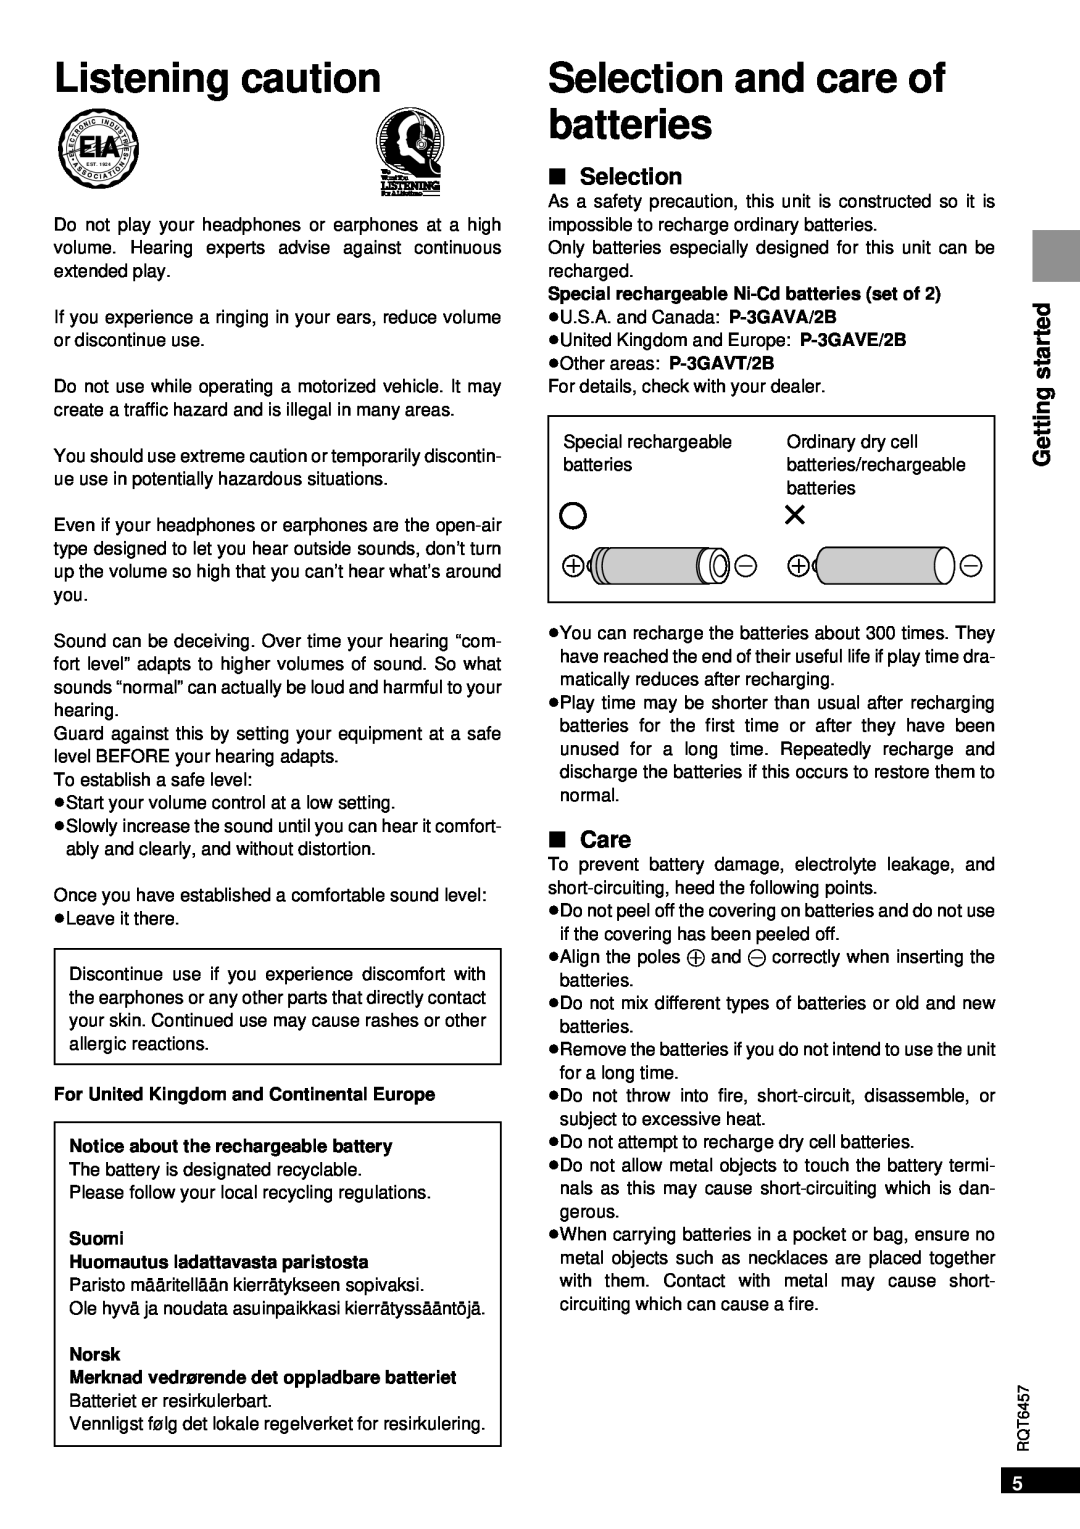 Panasonic SV-SR100 operating instructions Listening caution, Selection and care of batteries, ∫ Selection, ∫ Care, Getting 